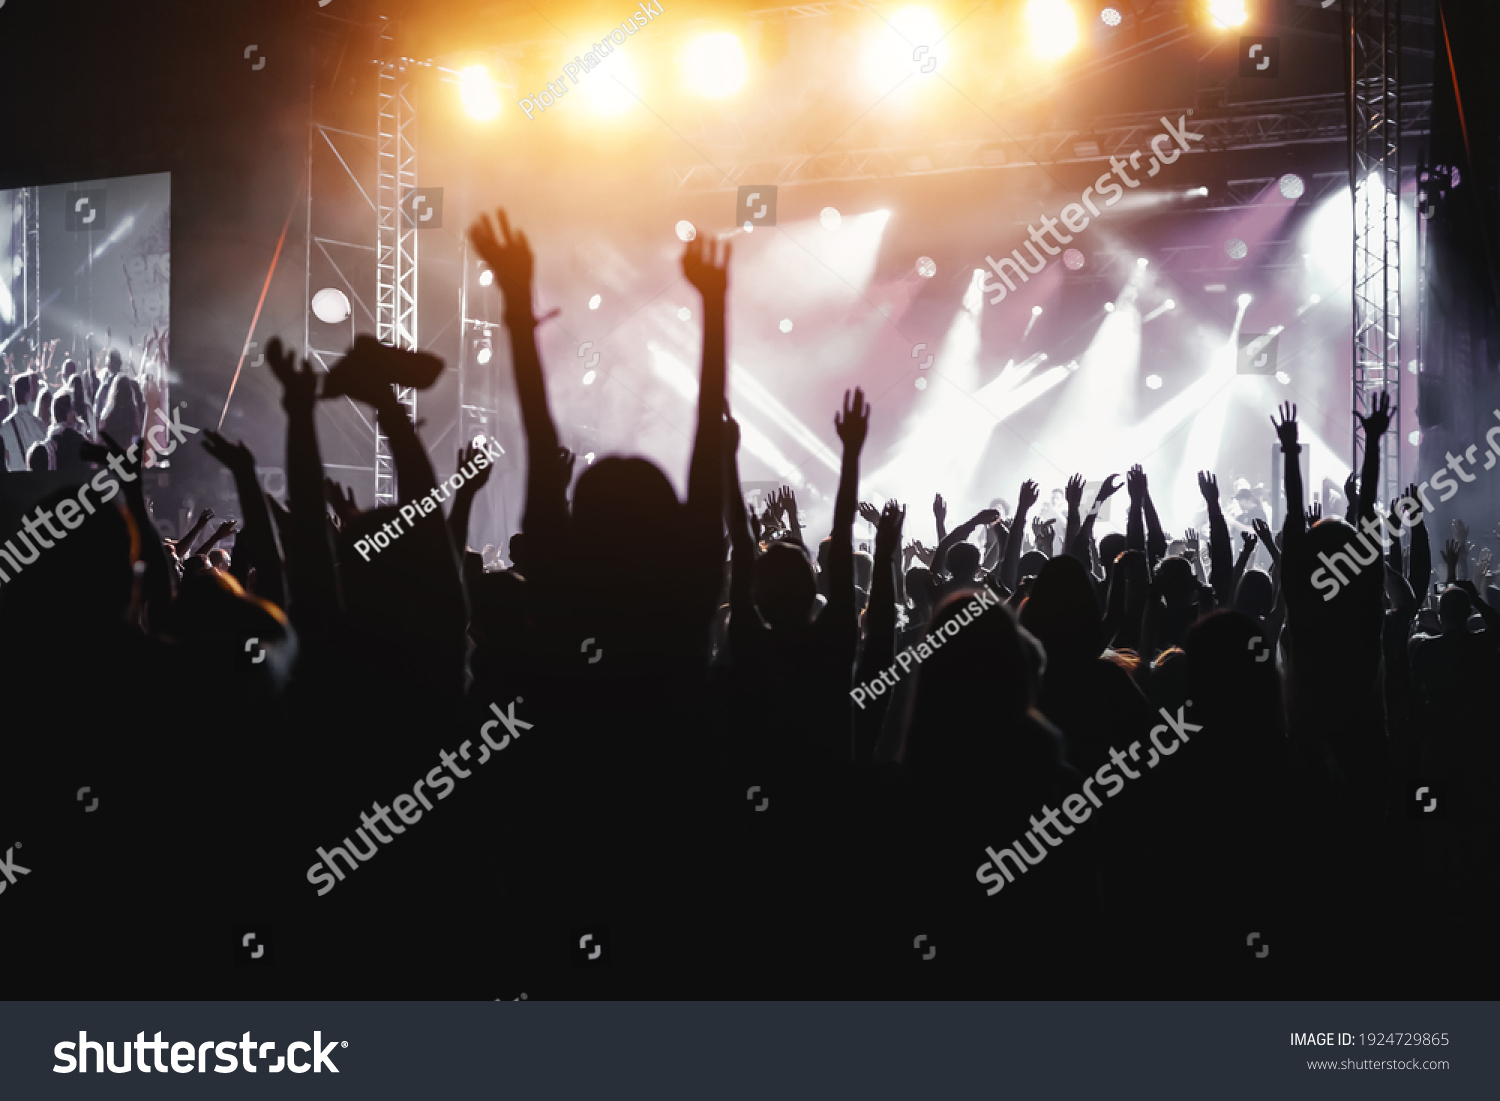 34,704 Hands air party Images, Stock Photos & Vectors | Shutterstock